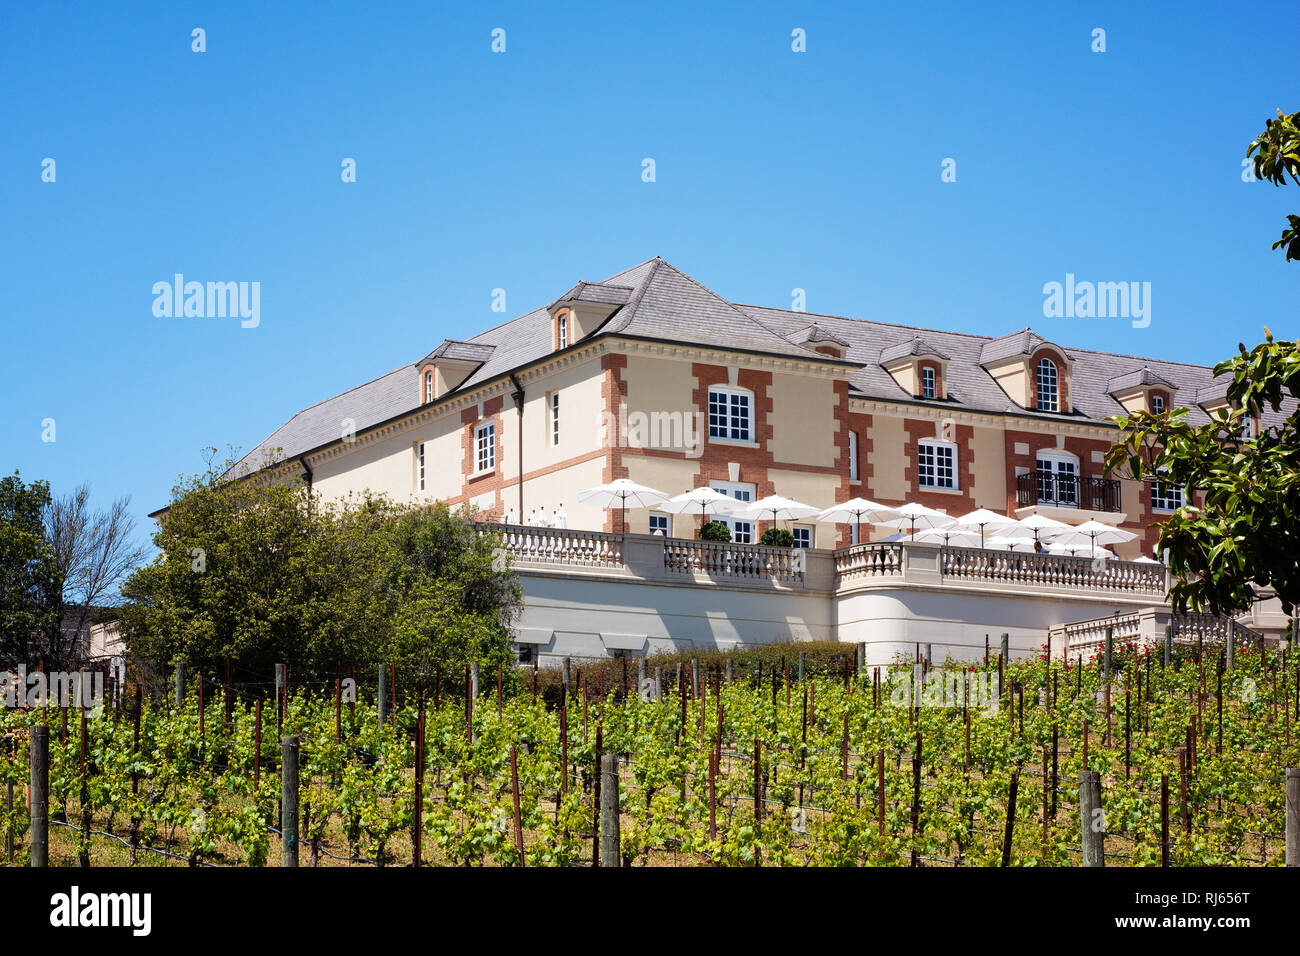 Domaine Carneros winery in Napa Valley, CA Foto Stock